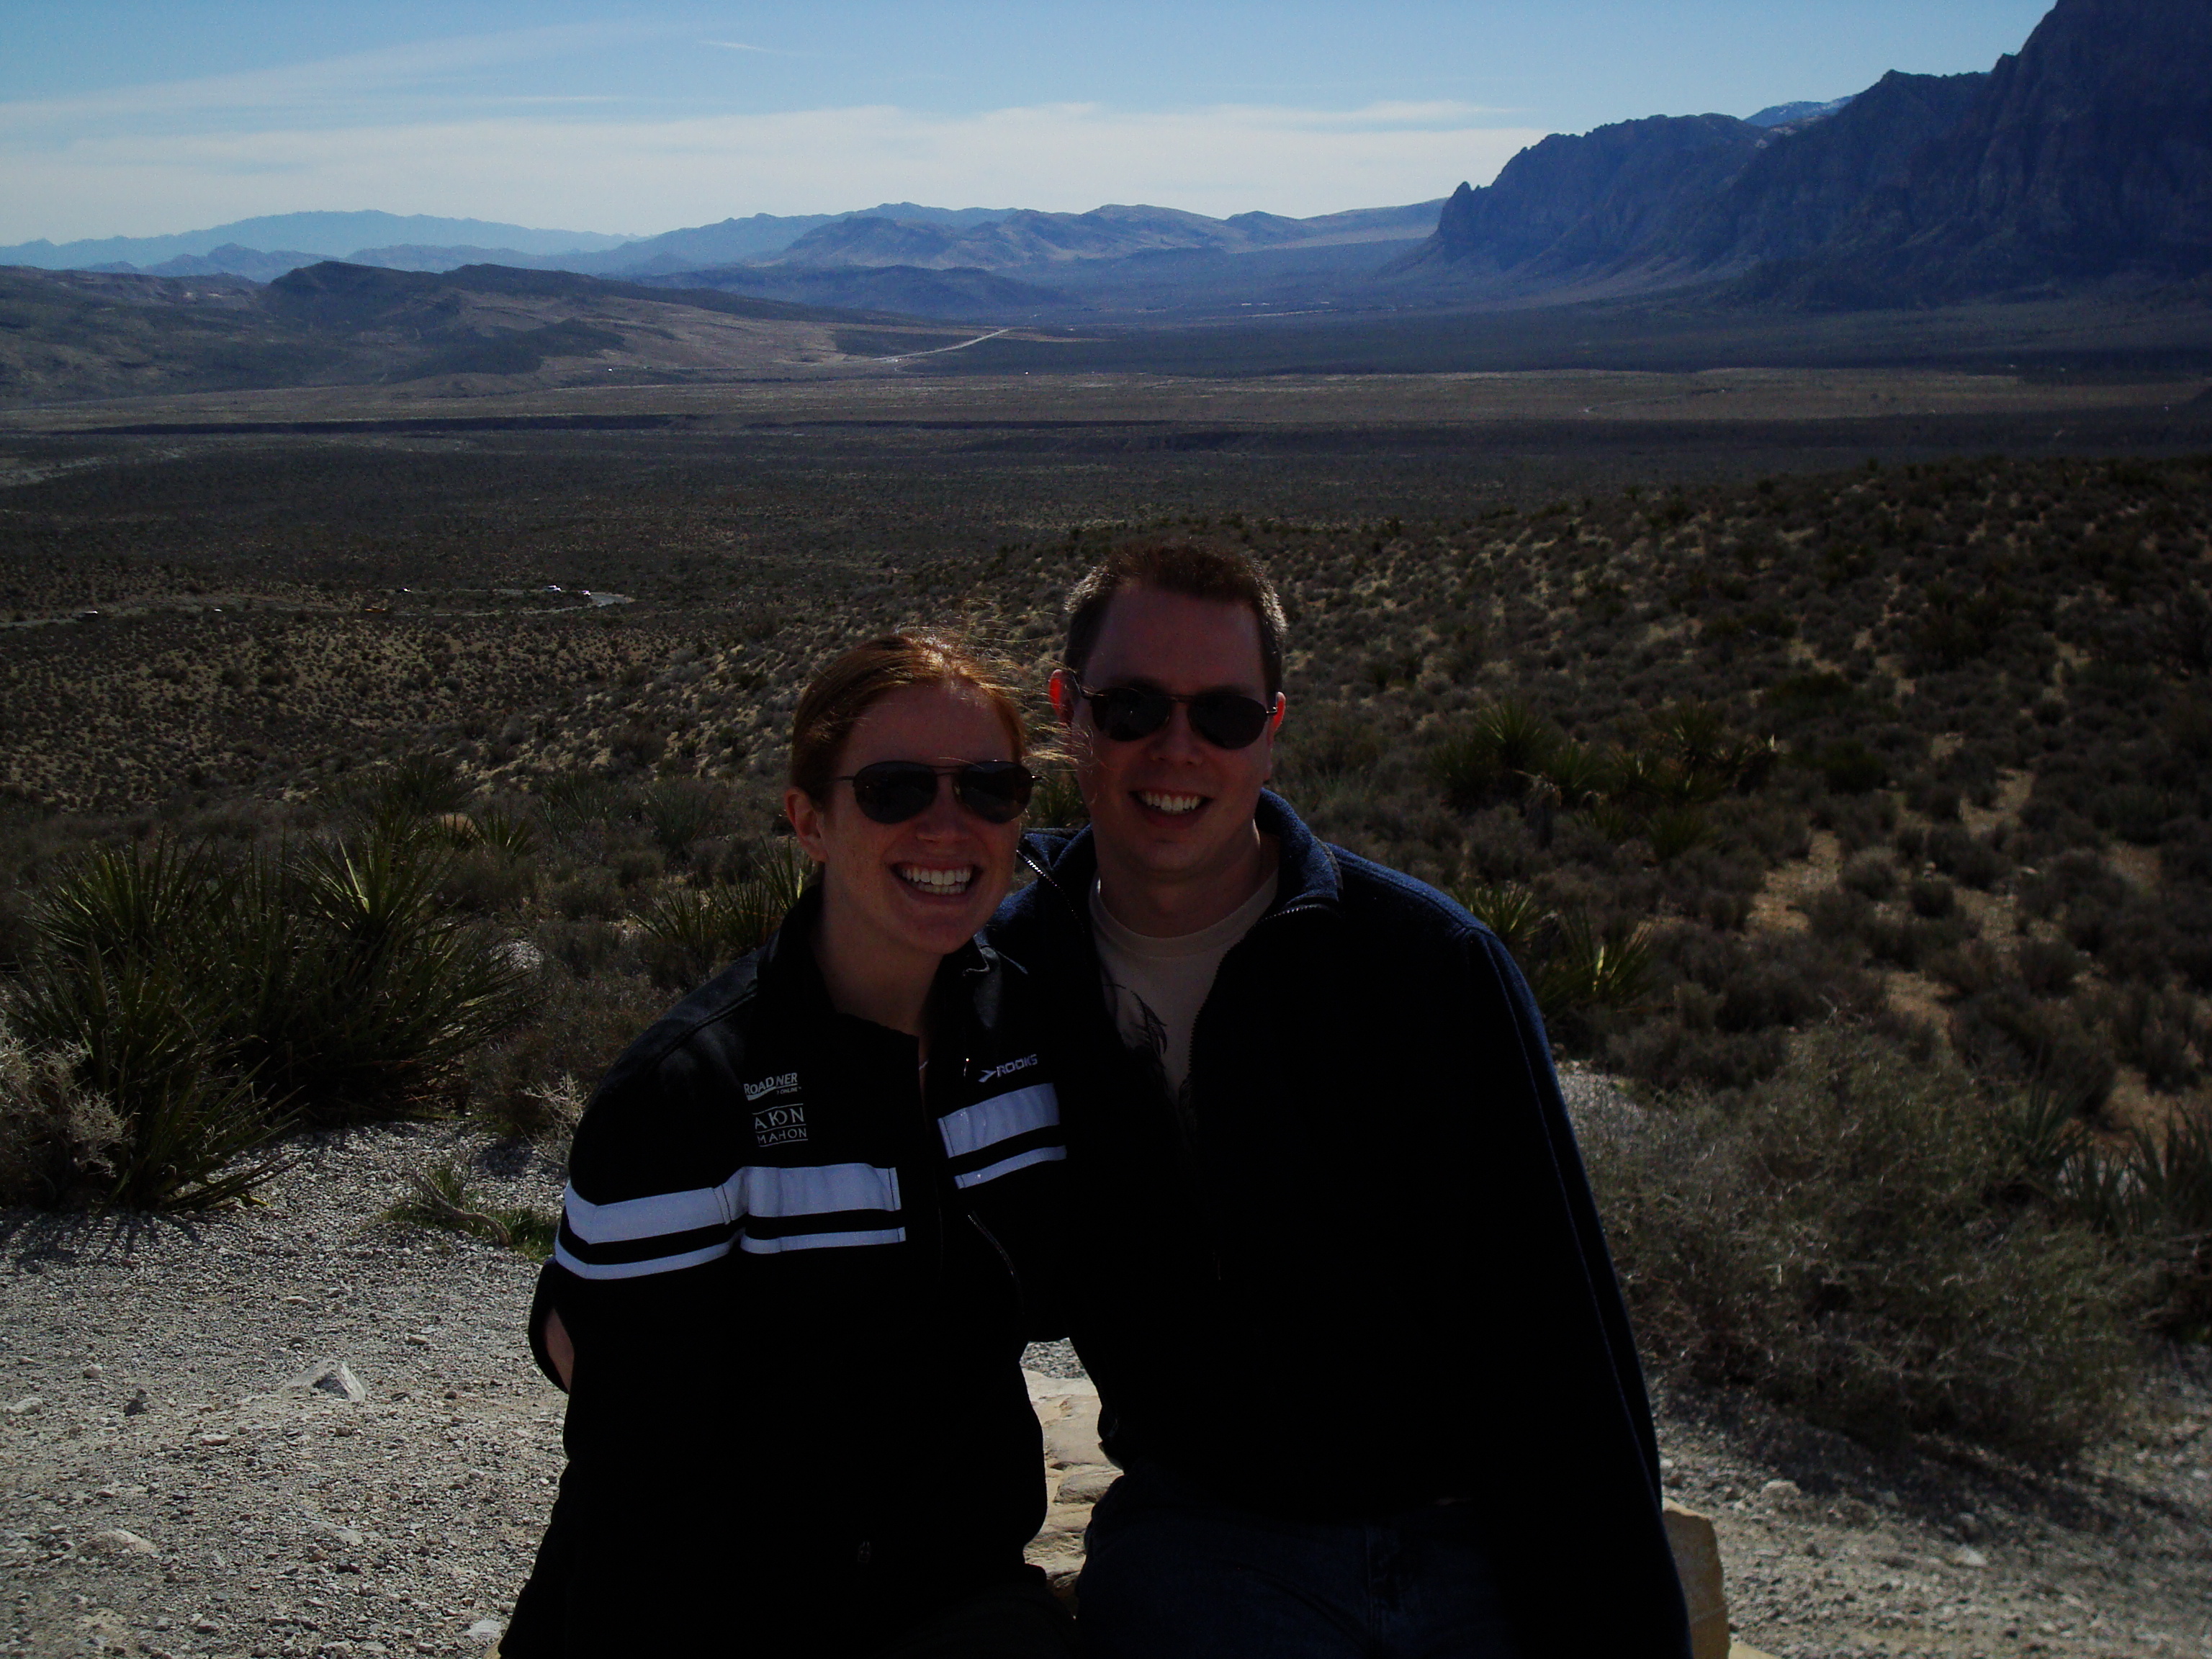 maybe the day? afternoon? after that final double-digit LR during pregnancy 1, we went to Vegas for a 'babymoon.' Pic is from Red Rock Canyon, not my LR in Chicago (obvs). 